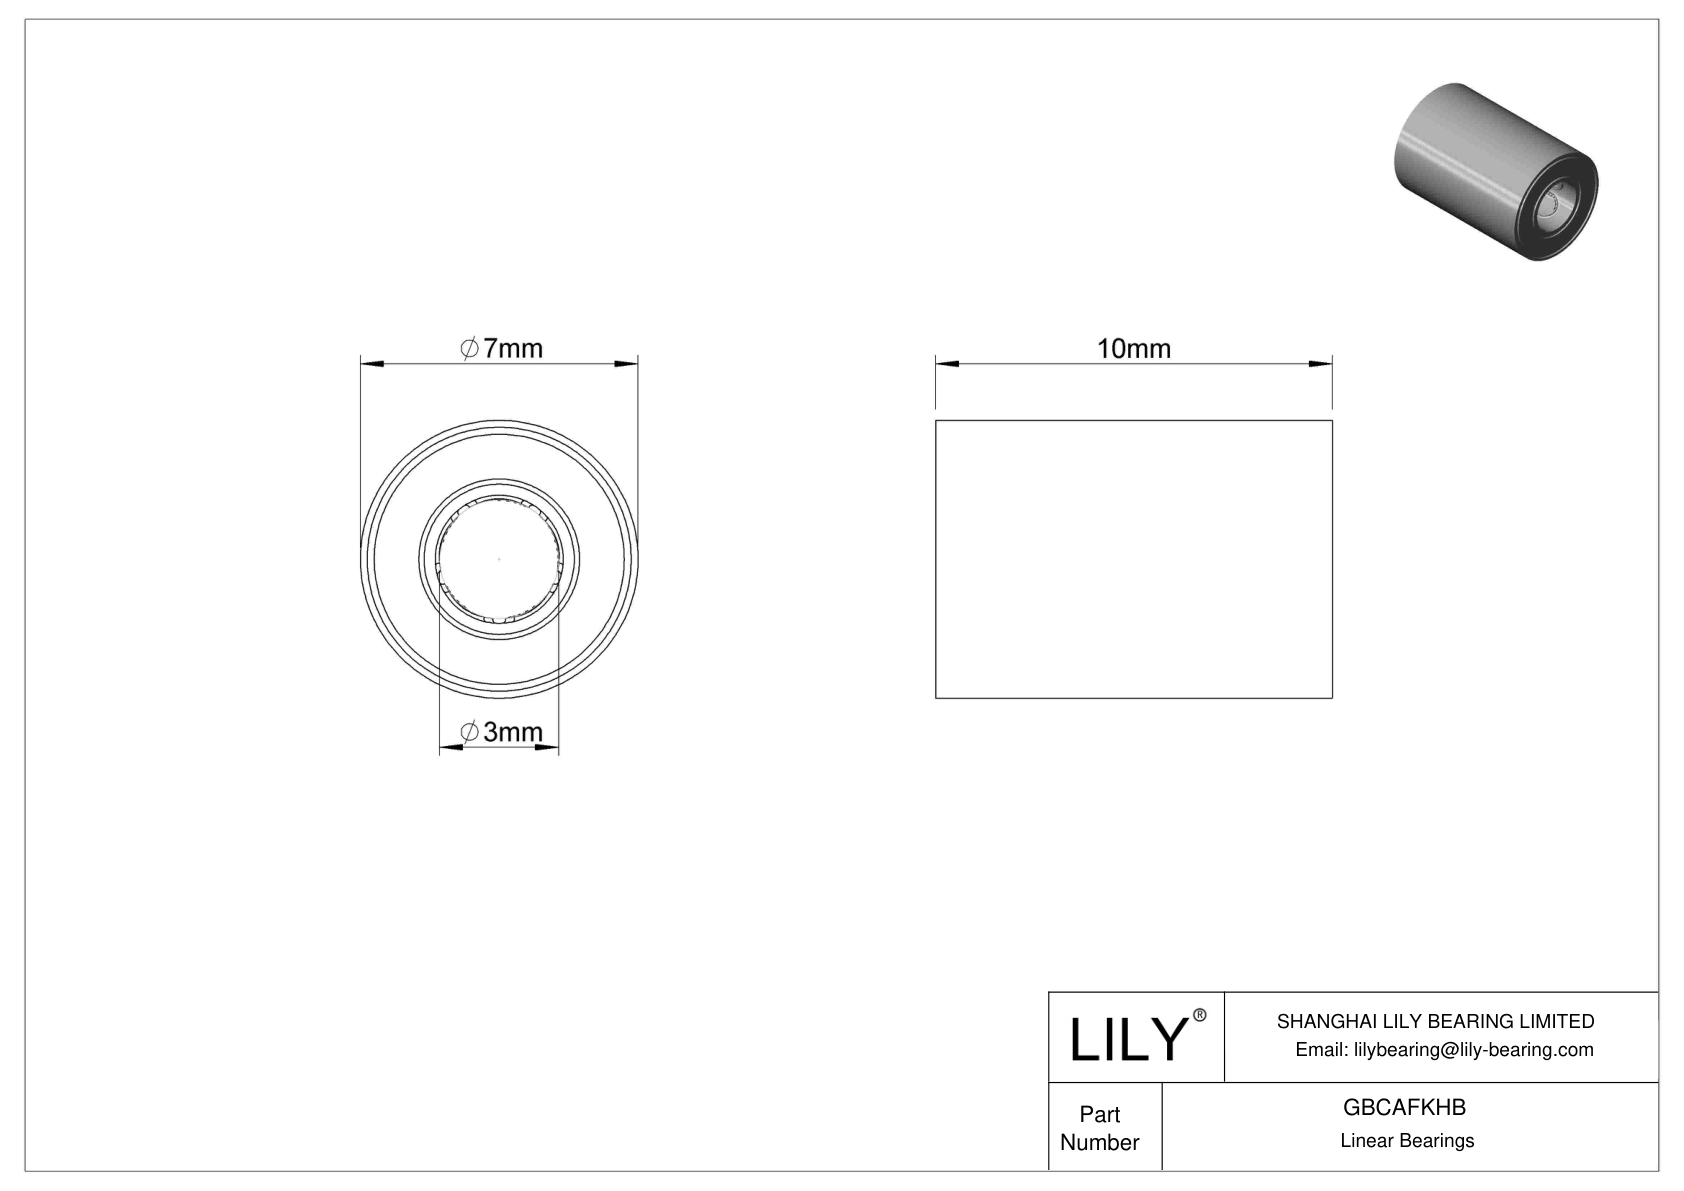 GBCAFKHB Common Linear Ball Bearings cad drawing